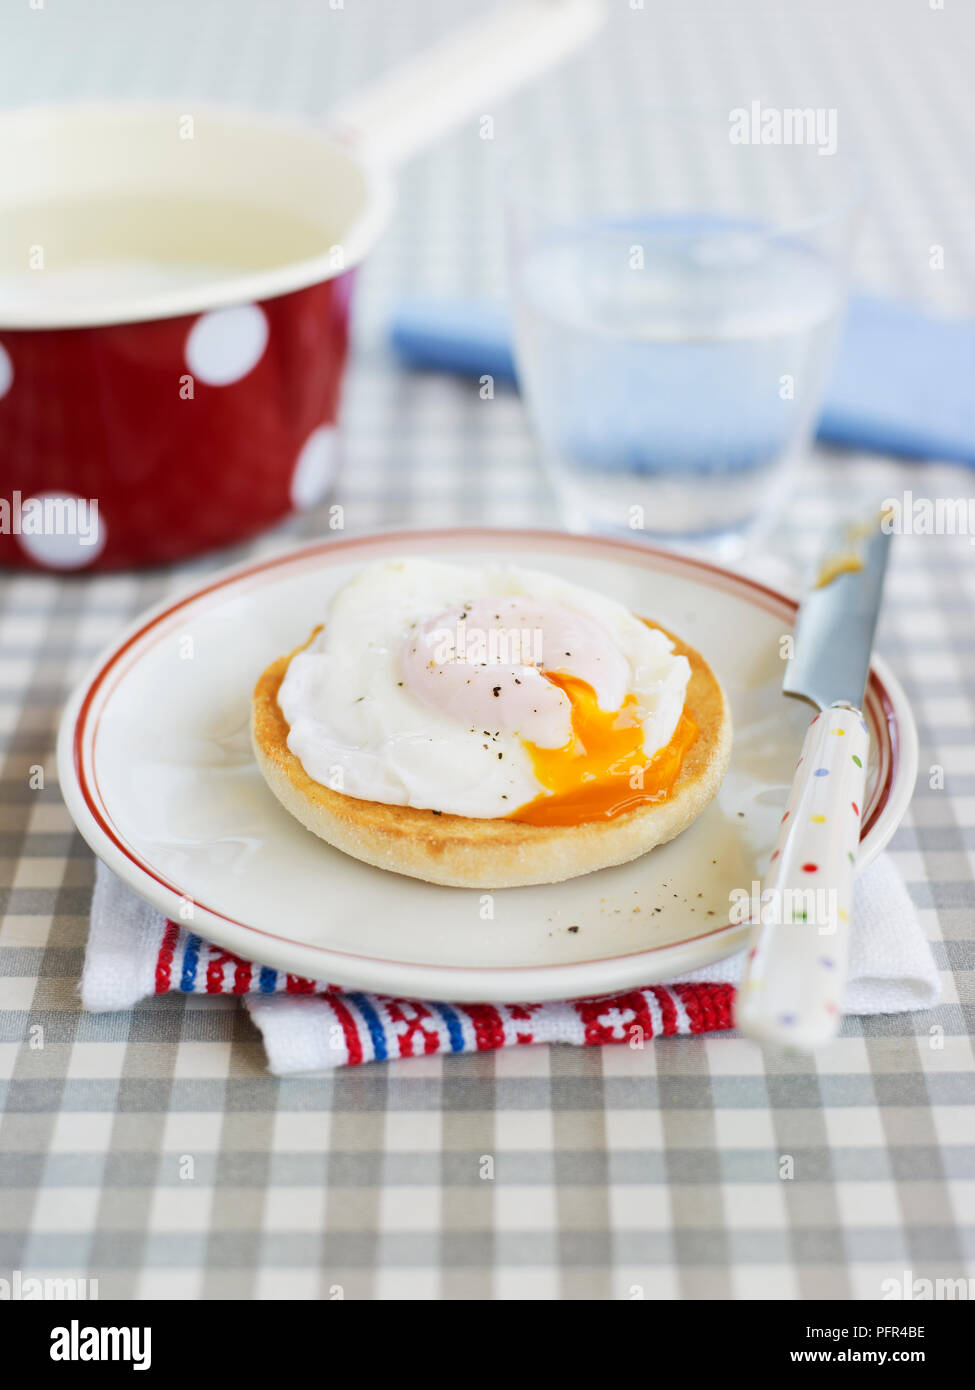 Poached egg on muffin Stock Photo